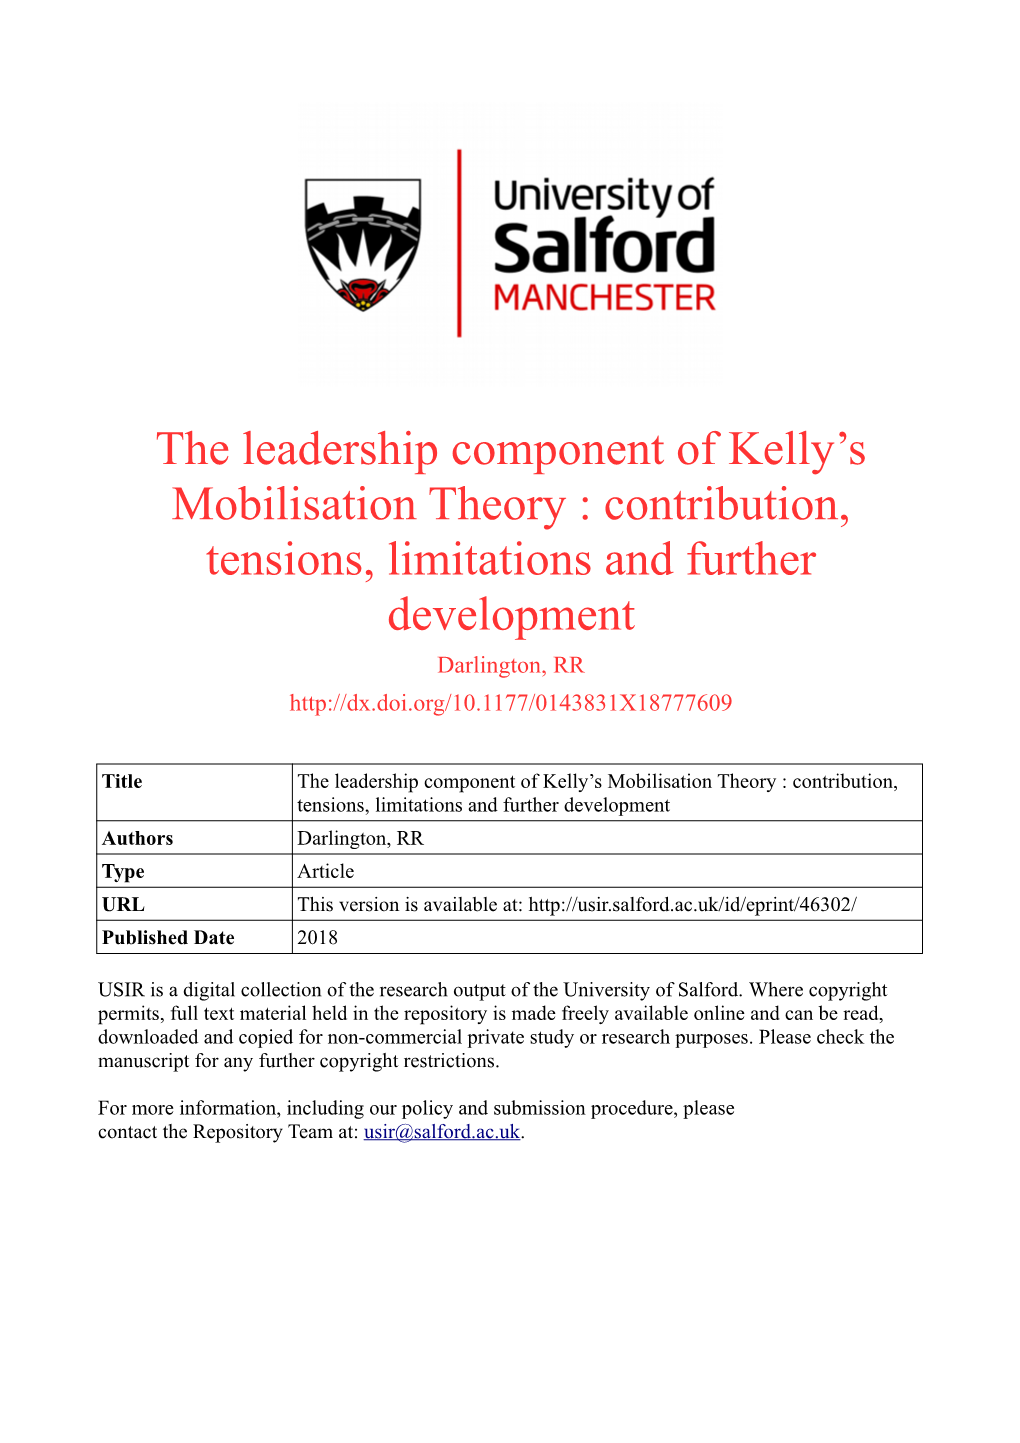 The Leadership Component of Kelly's Mobilisation Theory